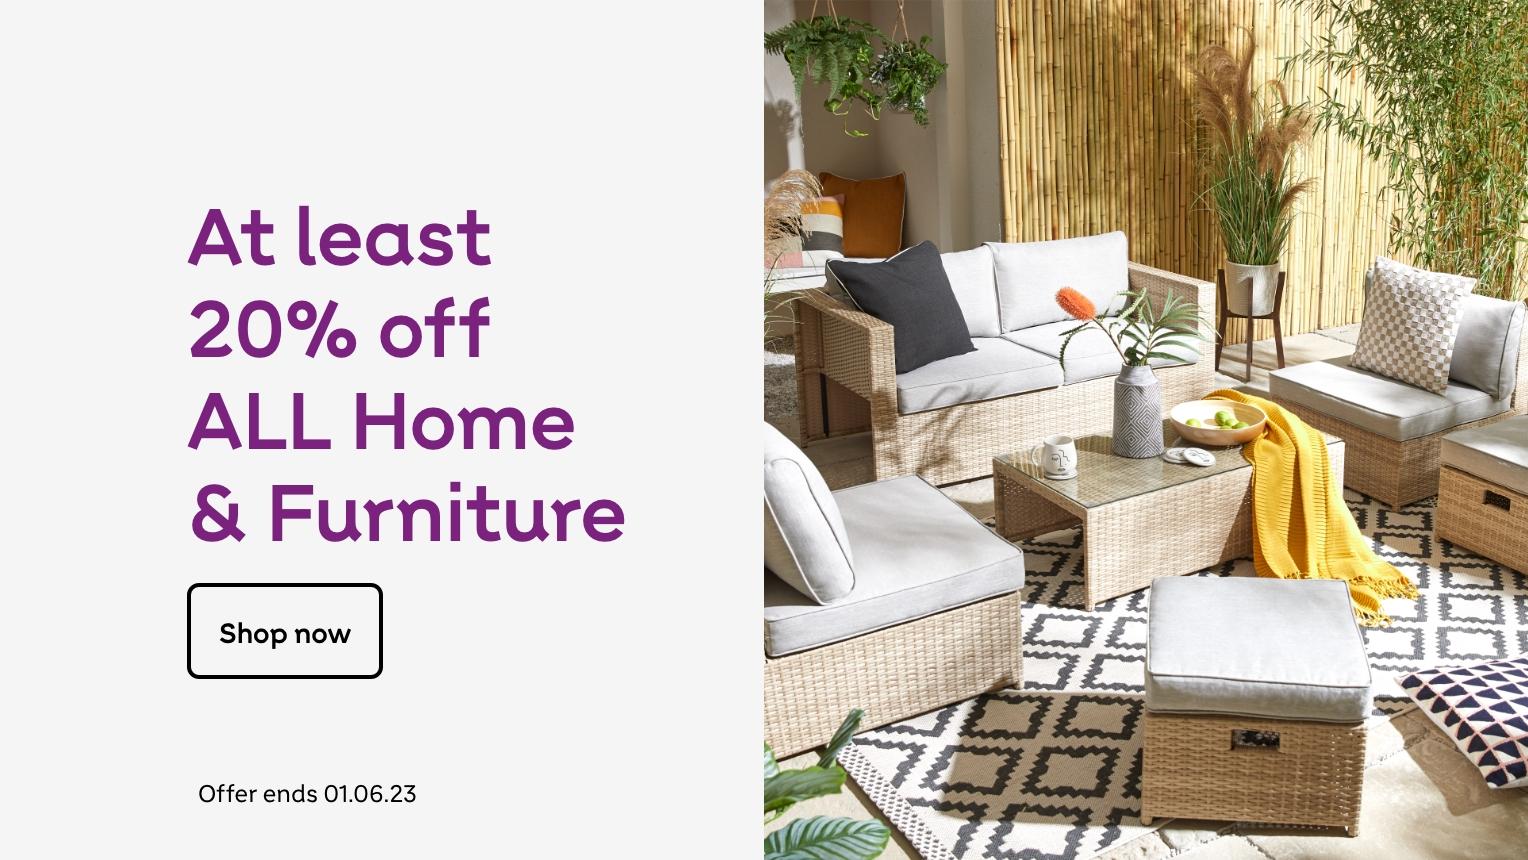 At least 20% off all Home & Furniture. Shop now. Offer ends 01.06.23.